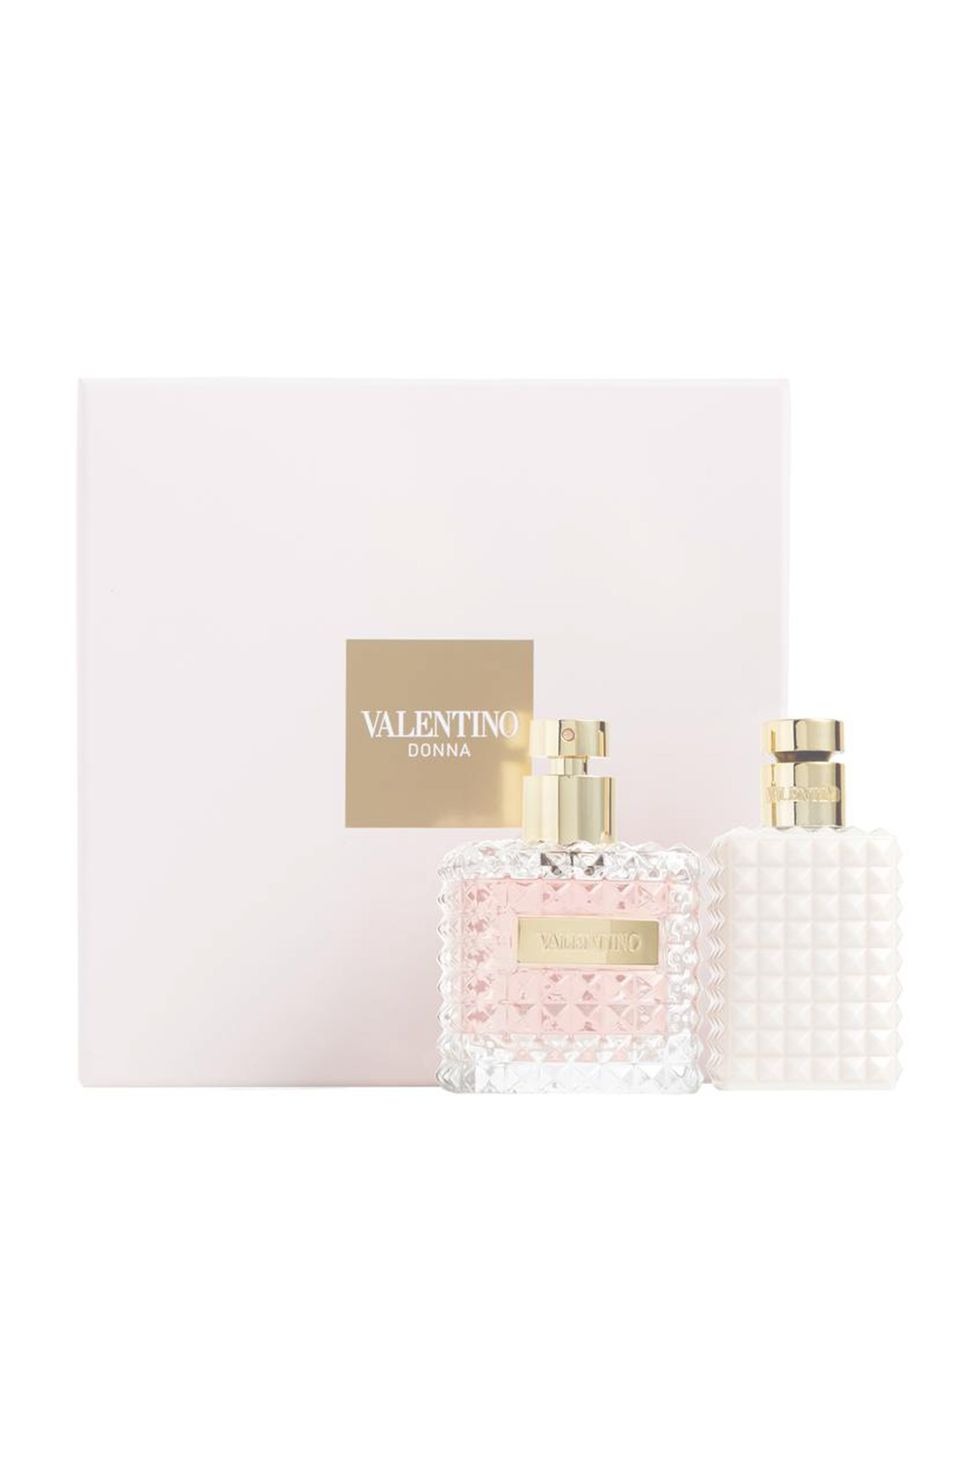 20 Gift Ideas For A Scent Themed Present - Candles, Perfumes, Diffusers ...